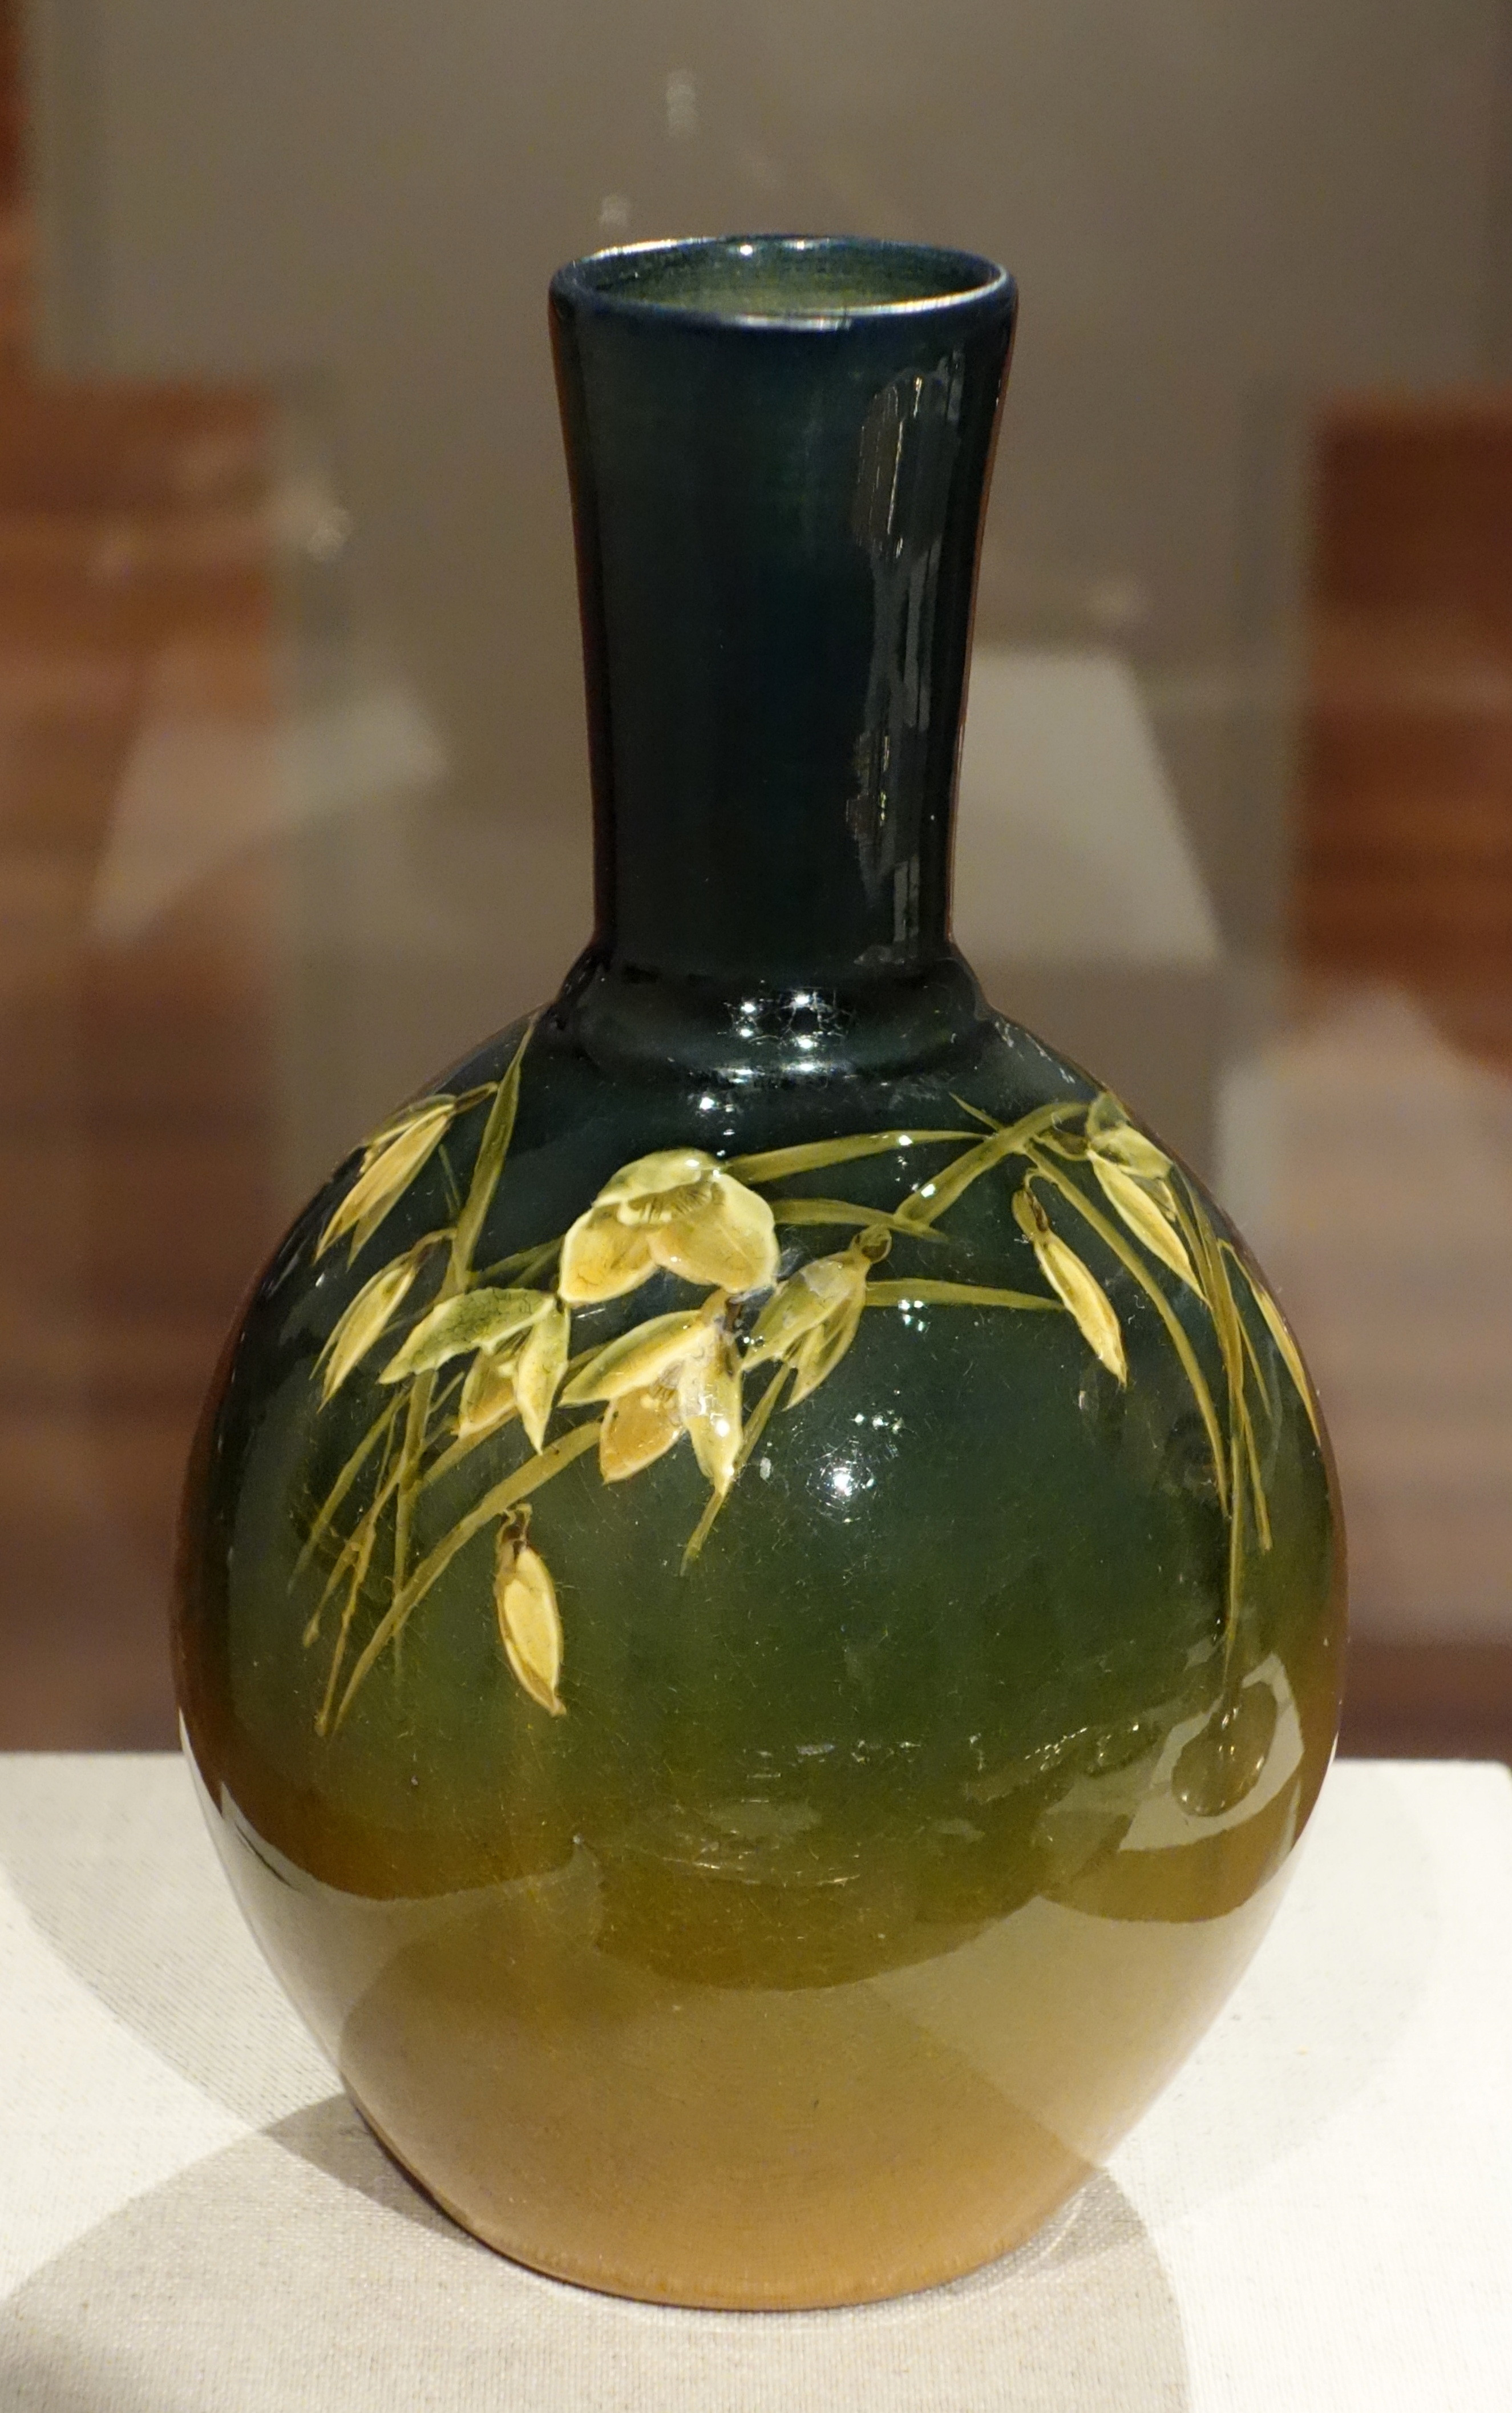 animal print vase of american art pottery wikipedia intended for glazed earthenware vase rookwood pottery ca 1900